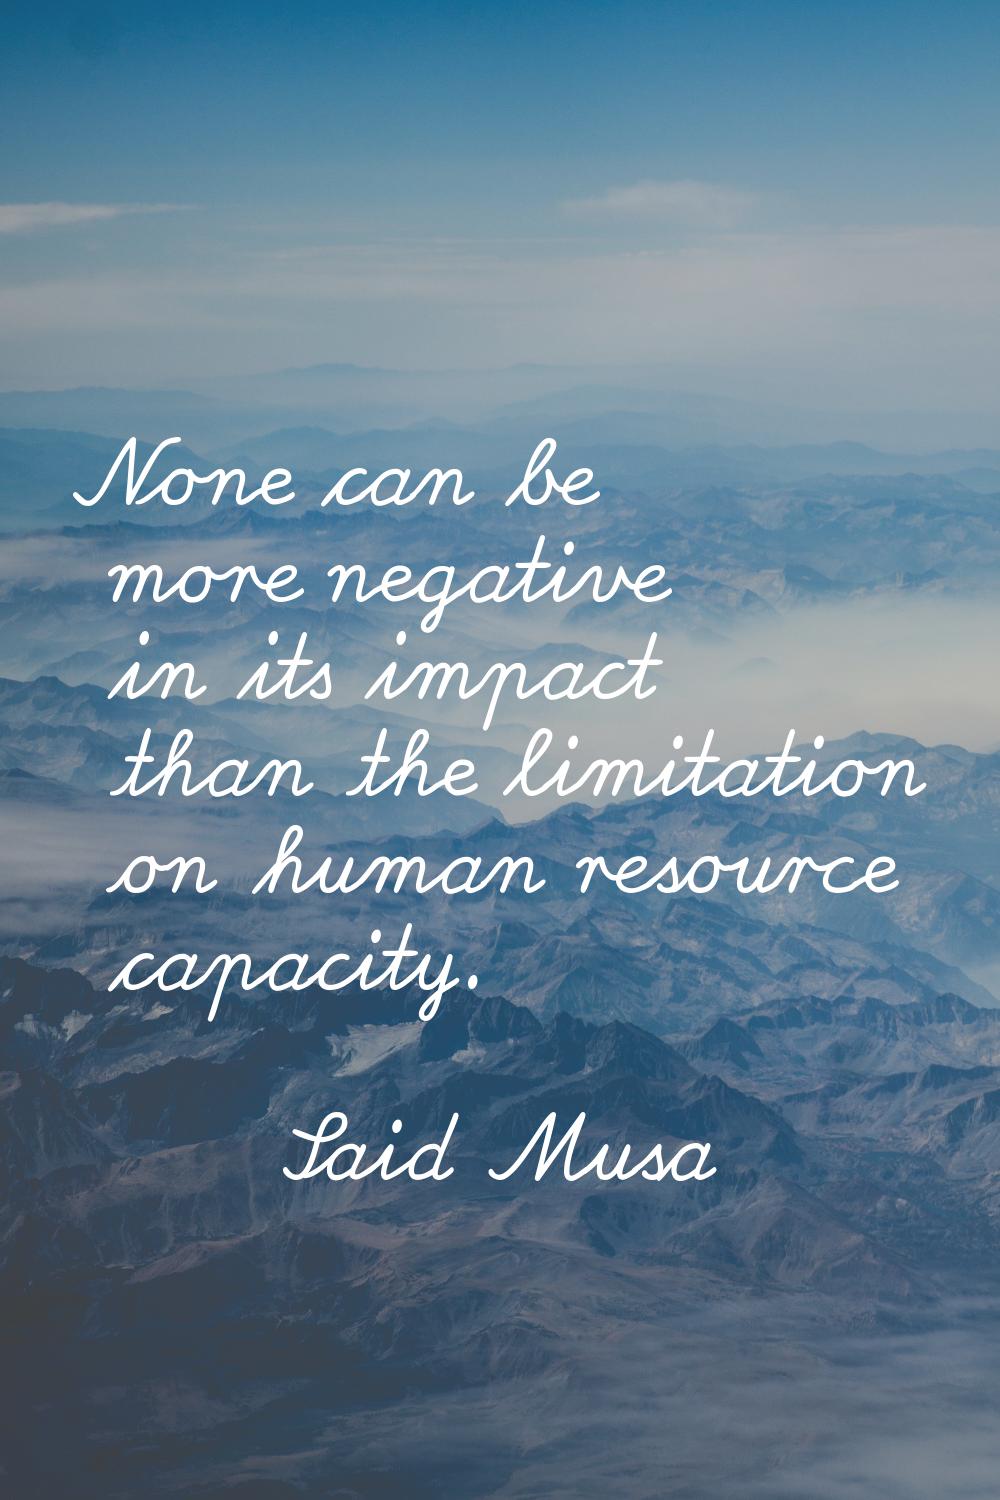 None can be more negative in its impact than the limitation on human resource capacity.